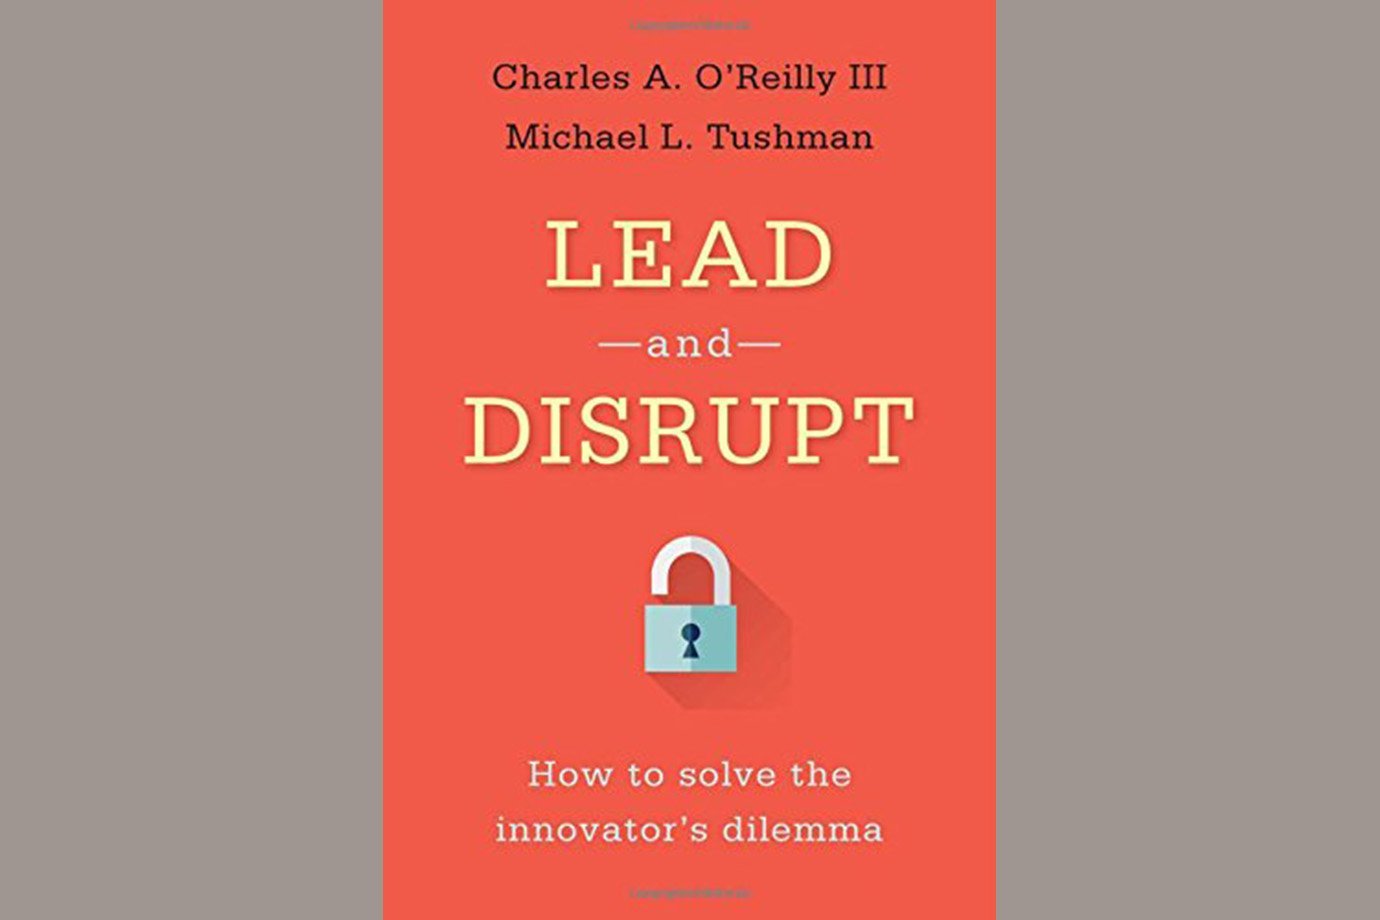 “Lead and Disrupt: How to Solve the Innovator's Dilemma”